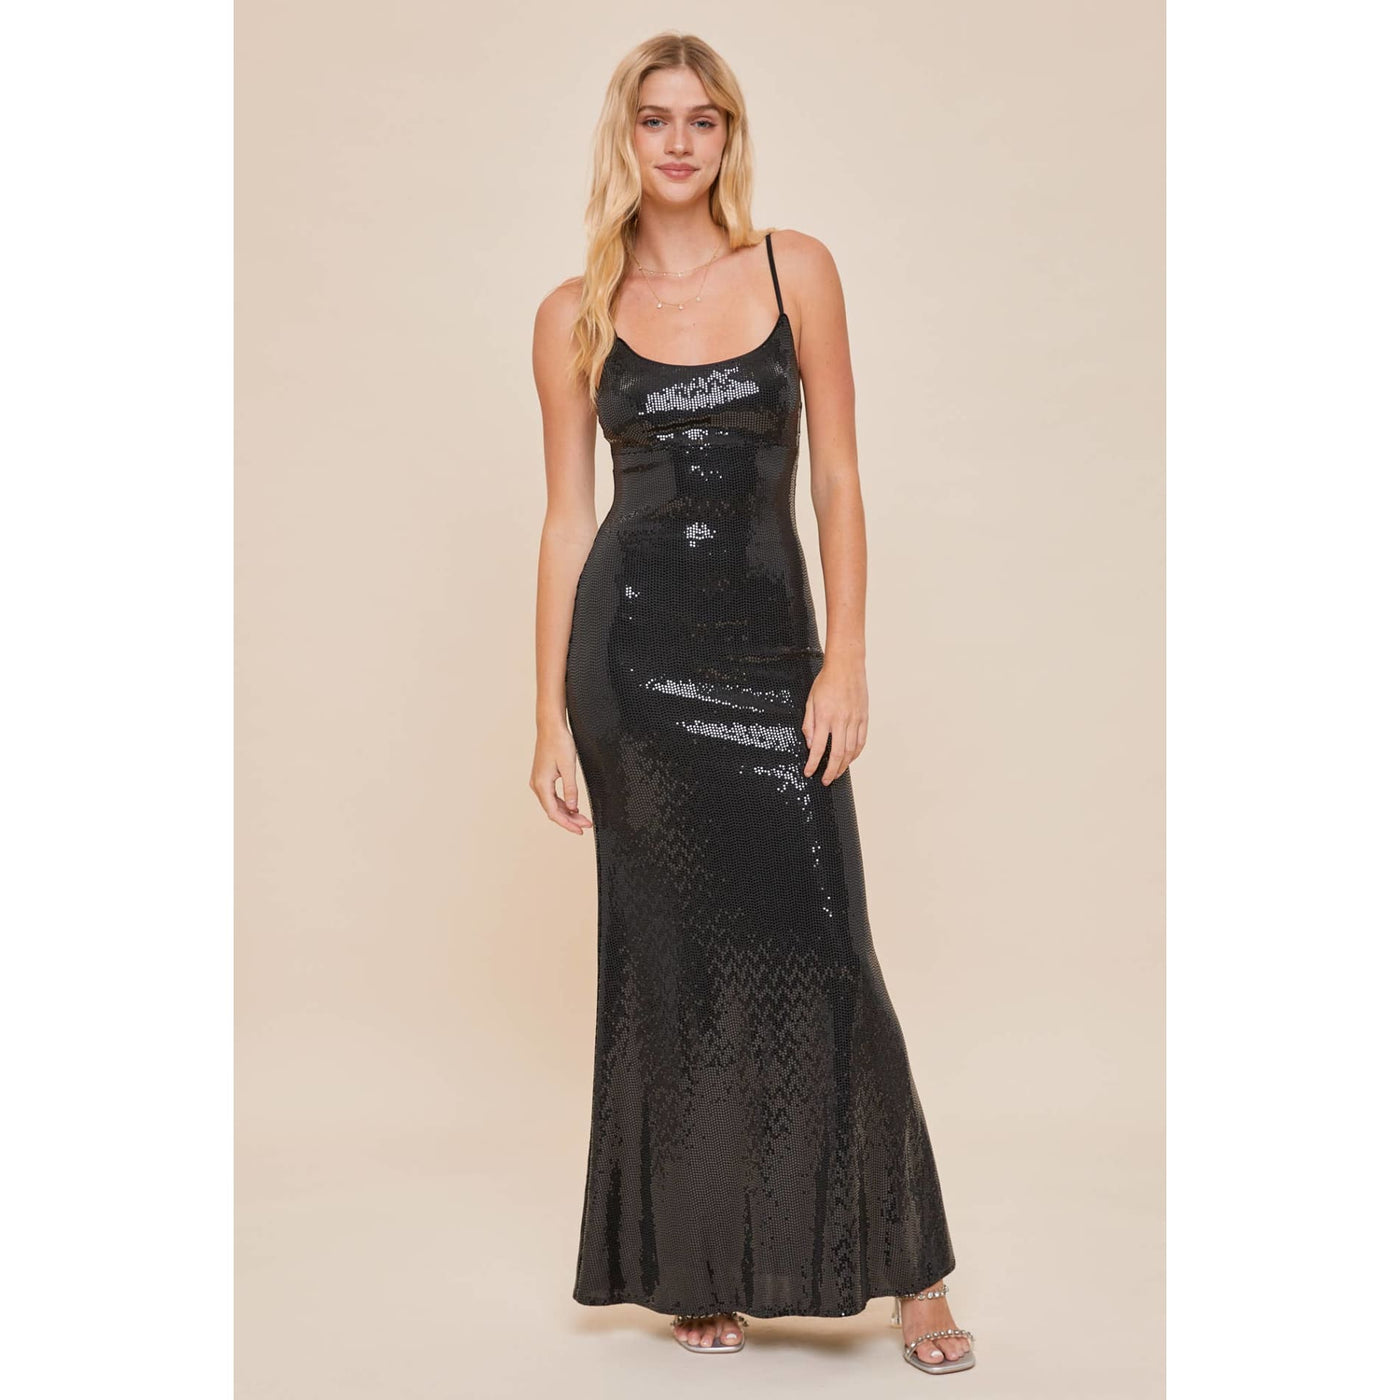 Fancy Night Out Maxi Dress - 175 Evening Dresses/Jumpsuits/Rompers